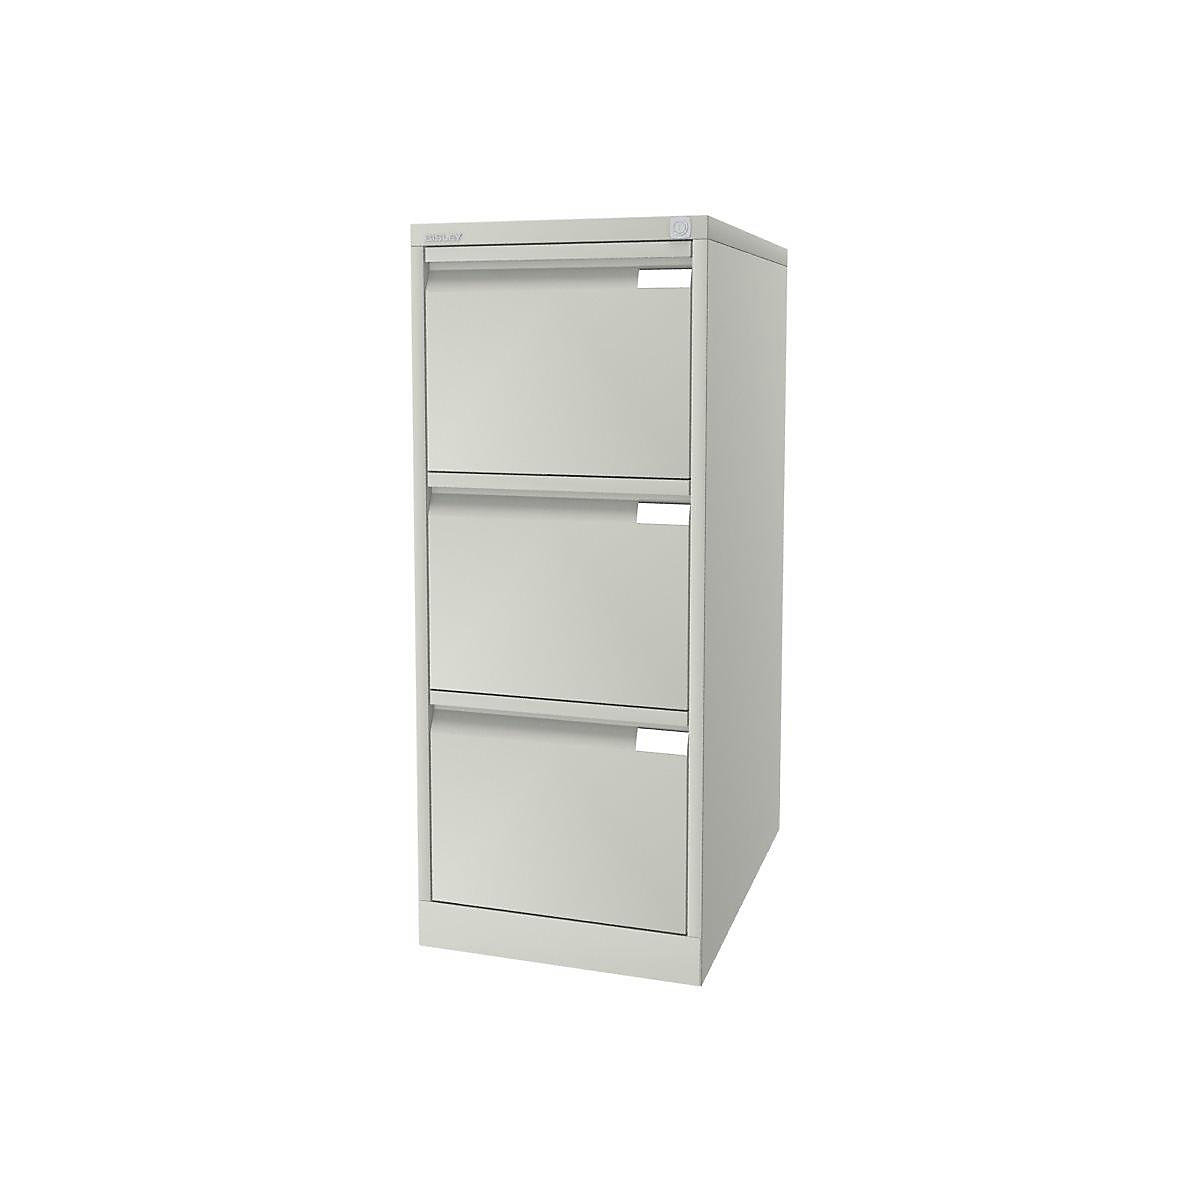 Suspension file cabinet, 1-track – BISLEY, 3 A4 drawers, pure white-18